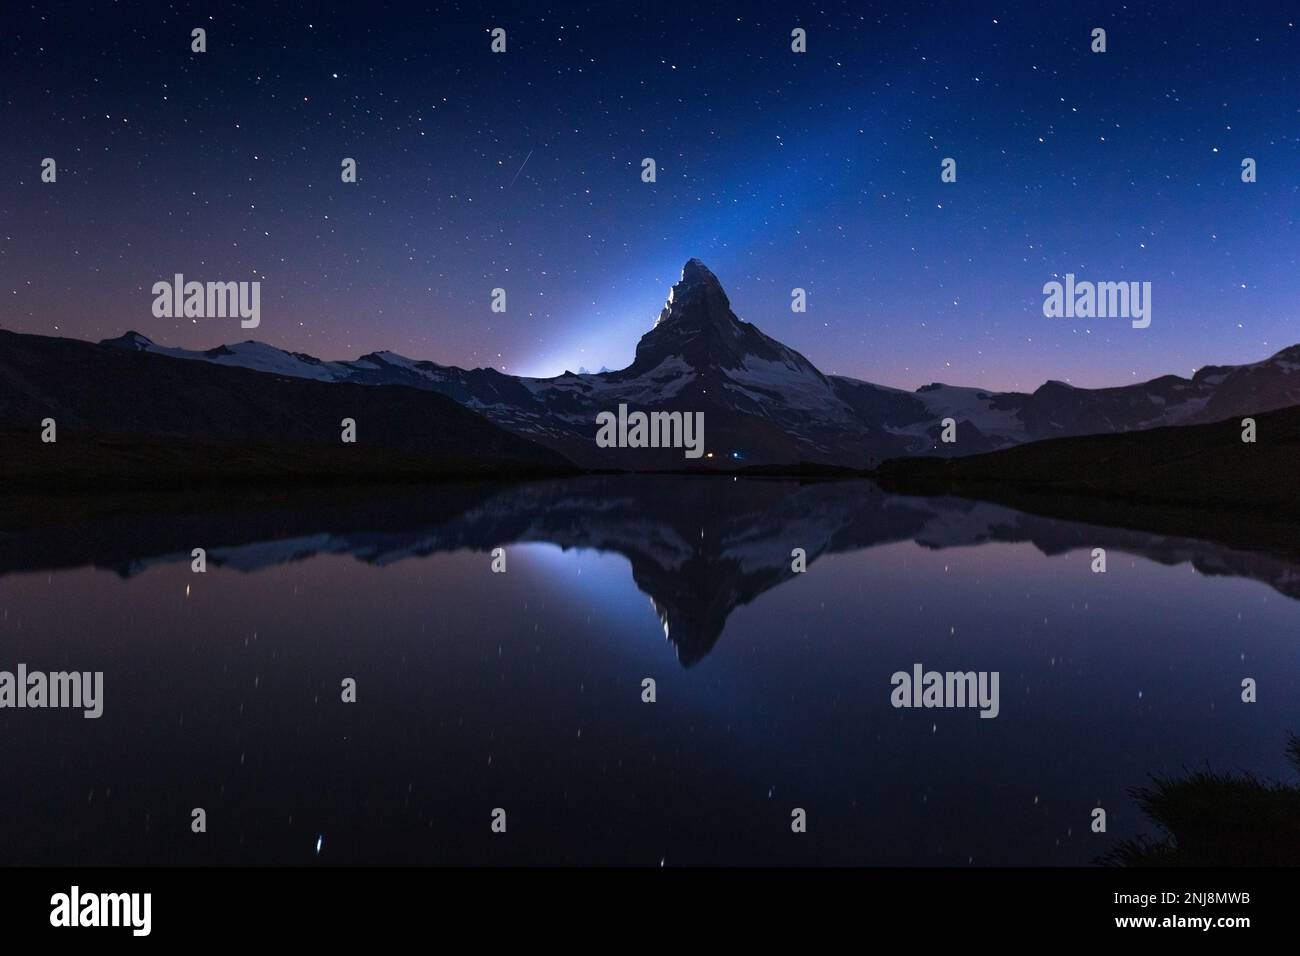 The celebration of 150 years from first ascent of the Matterhorn (Cervino). Reflection on Lake Stellisee. Beam of light. Night landscape. Swiss Alps. Stock Photo